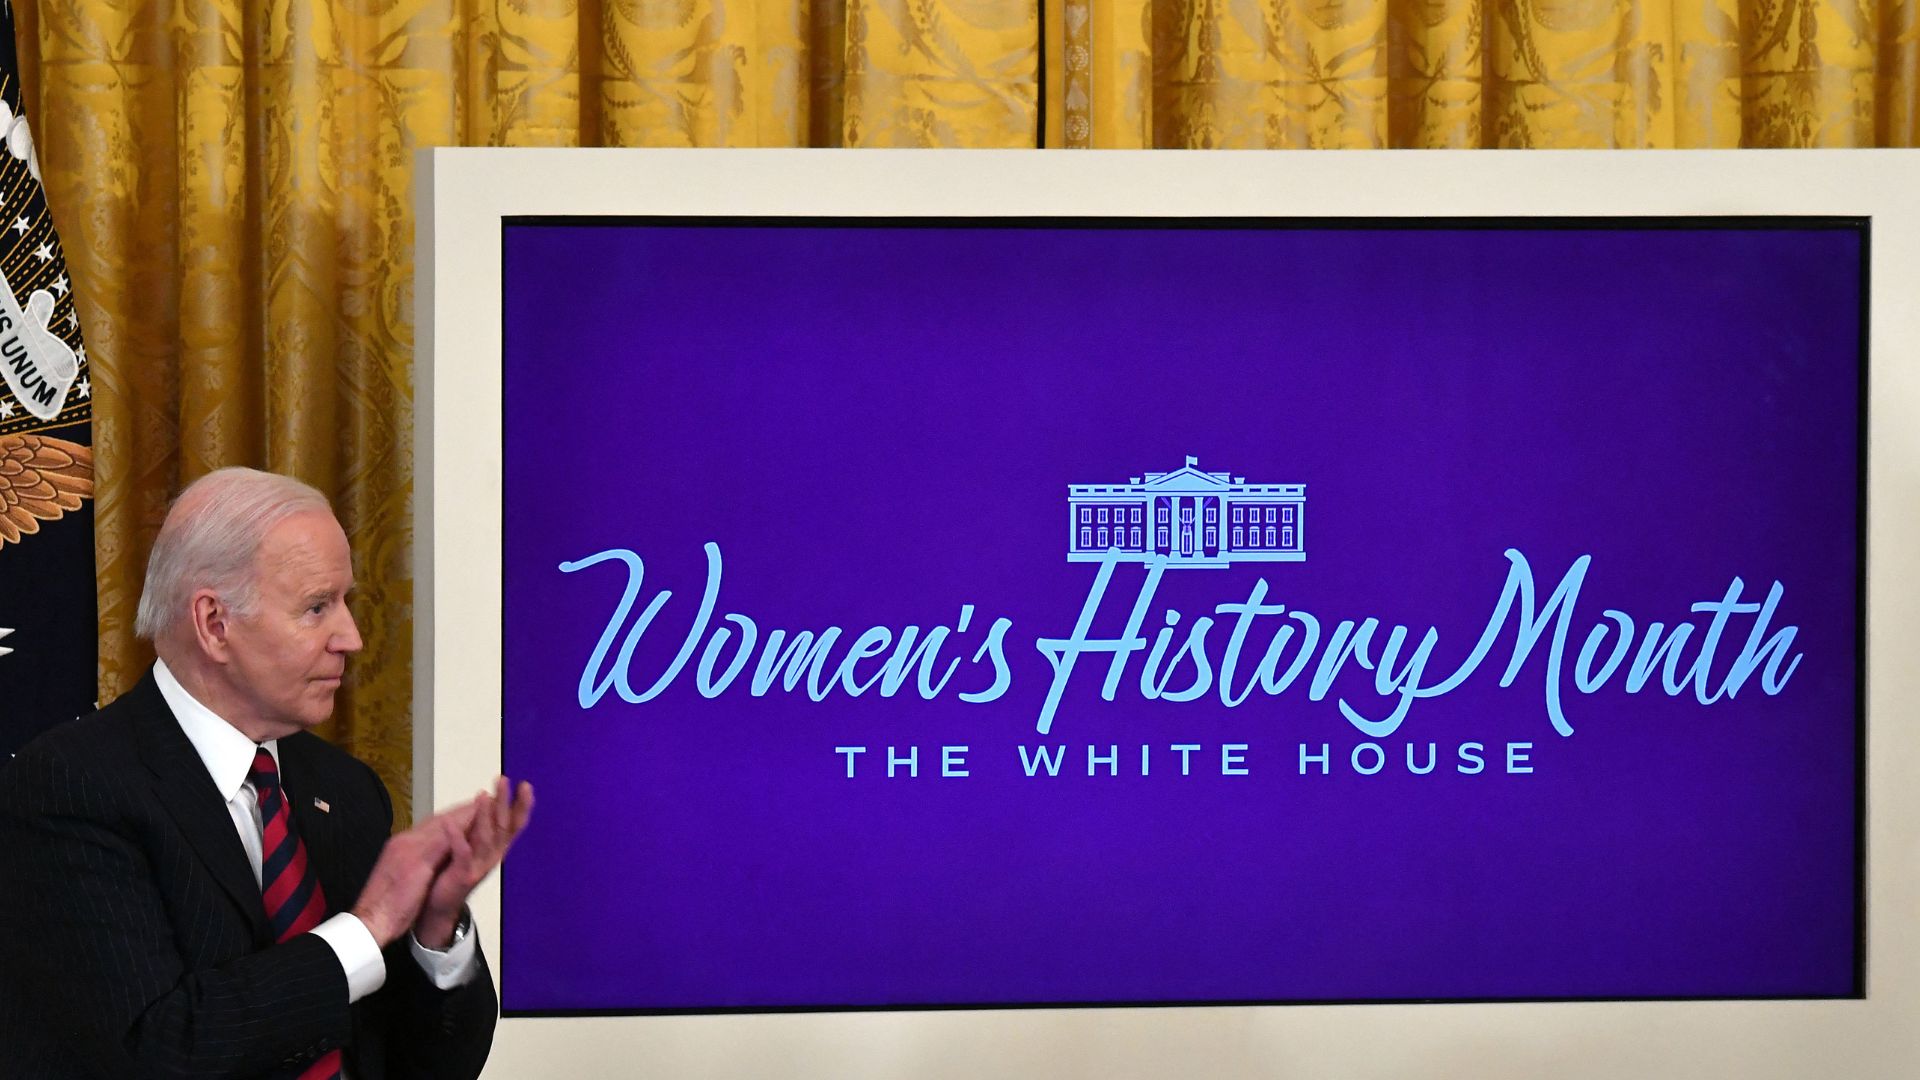 Dudes Have Been Dominating Women’s History Month This Year